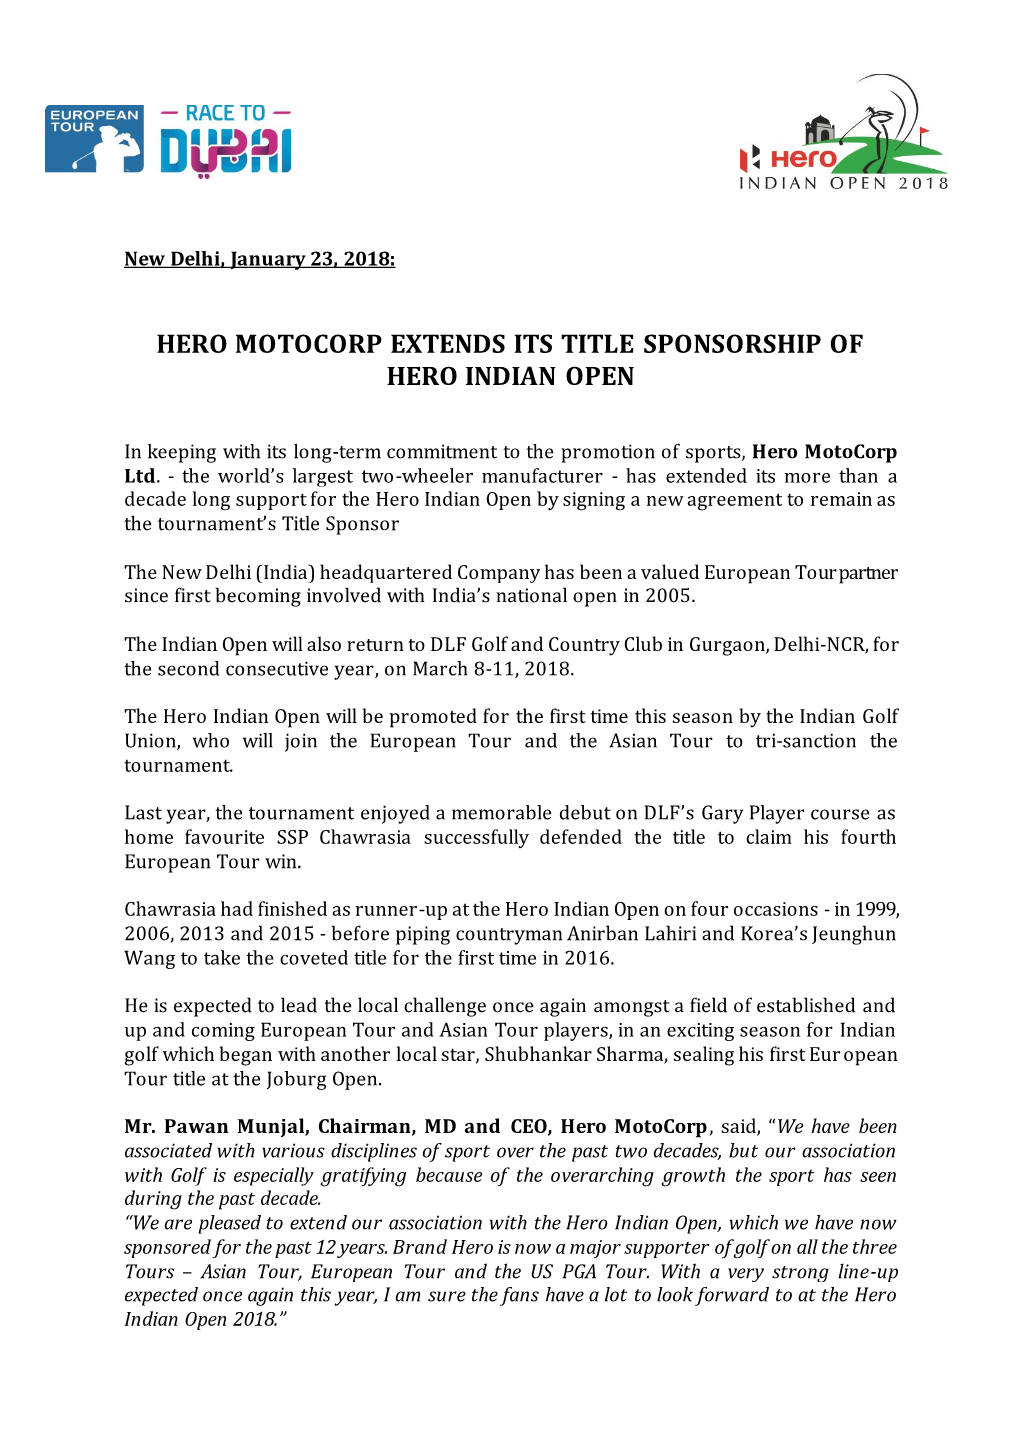 Hero Motocorp Extends Its Title Sponsorship of Hero Indian Open